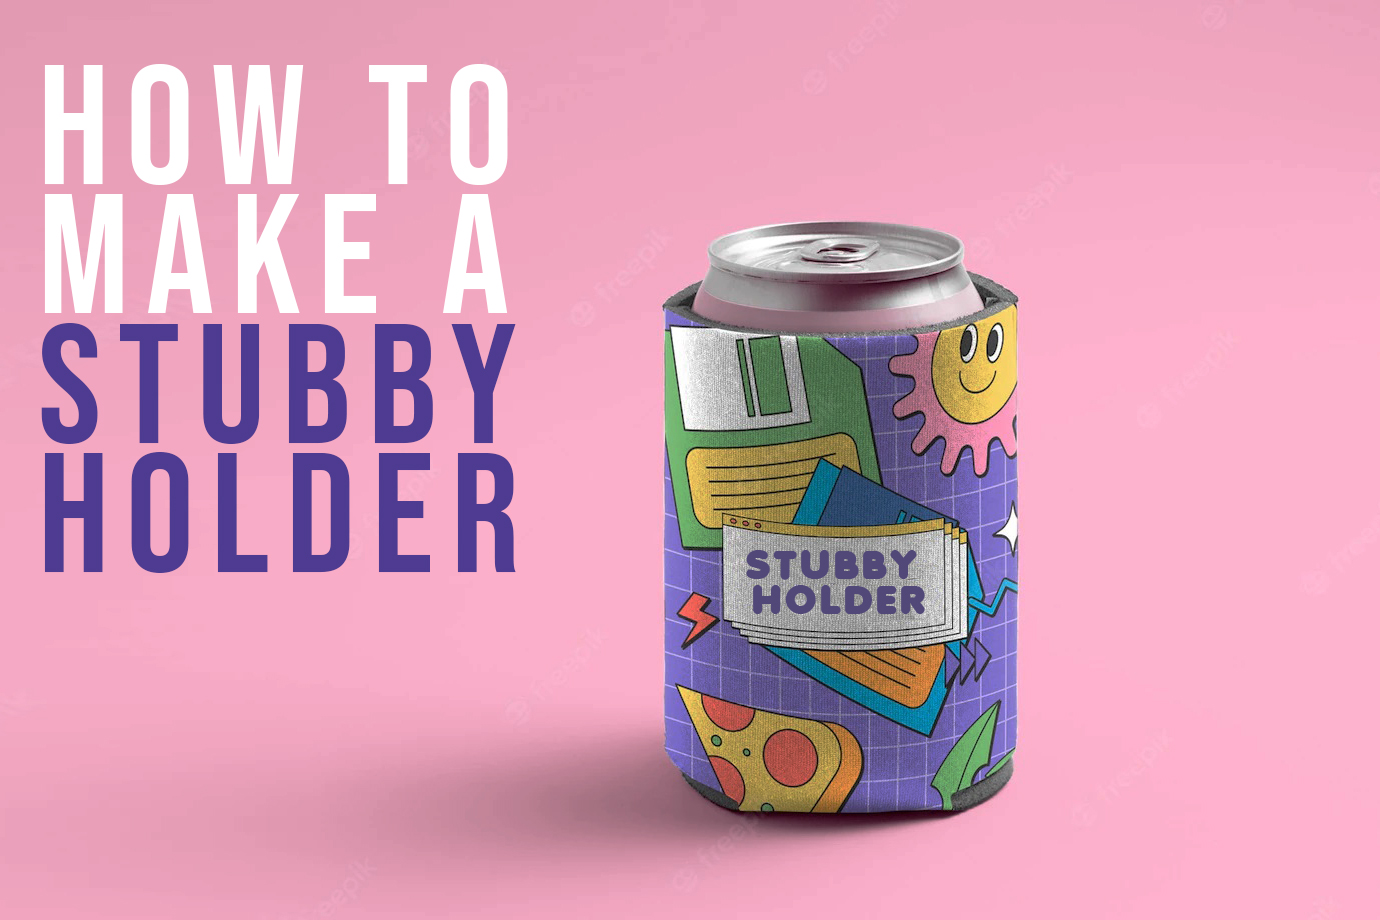 How To Make Stubby Holder | A Step-By-Step Guide